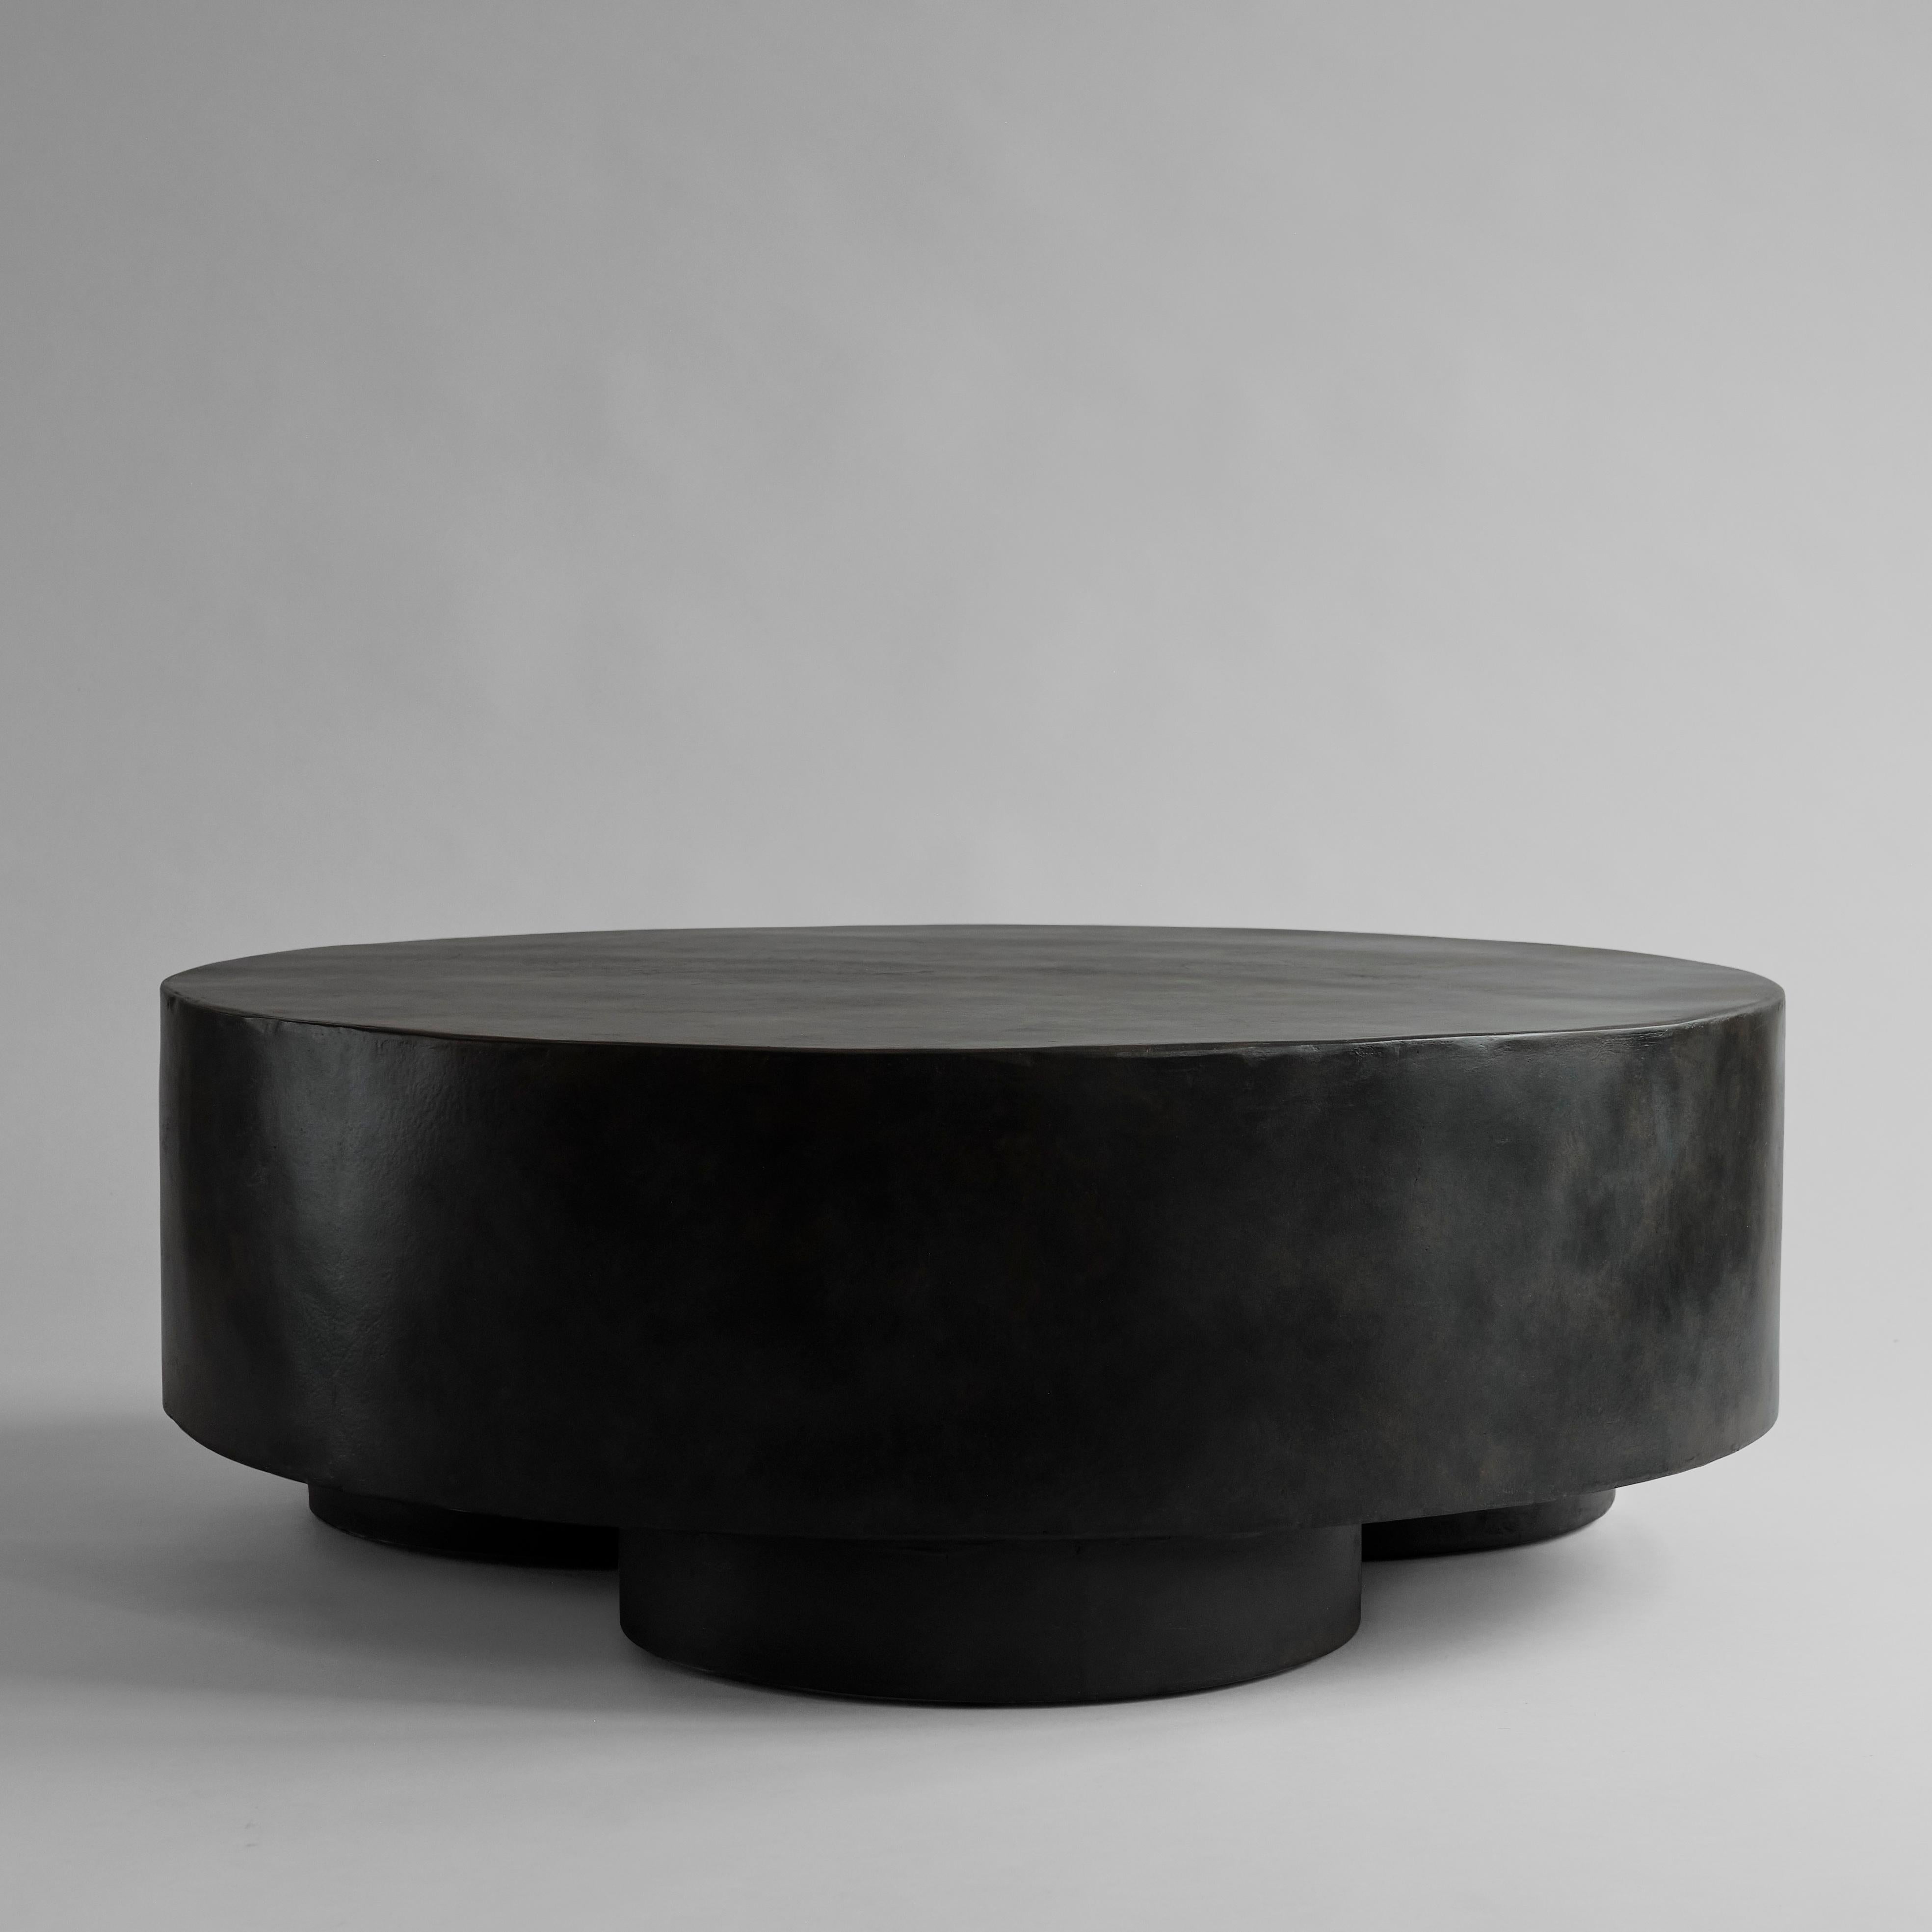 Big foot coffee table by 101 Copenhagen
Designed by Kristian Sofus Hansen & Tommy Hyldahl
Dimensions: L110 / W110 /H39 CM
Materials: Fiber Concrete

At first glance the Big Foots collection looks heavy and dense, yet on further inspection, the